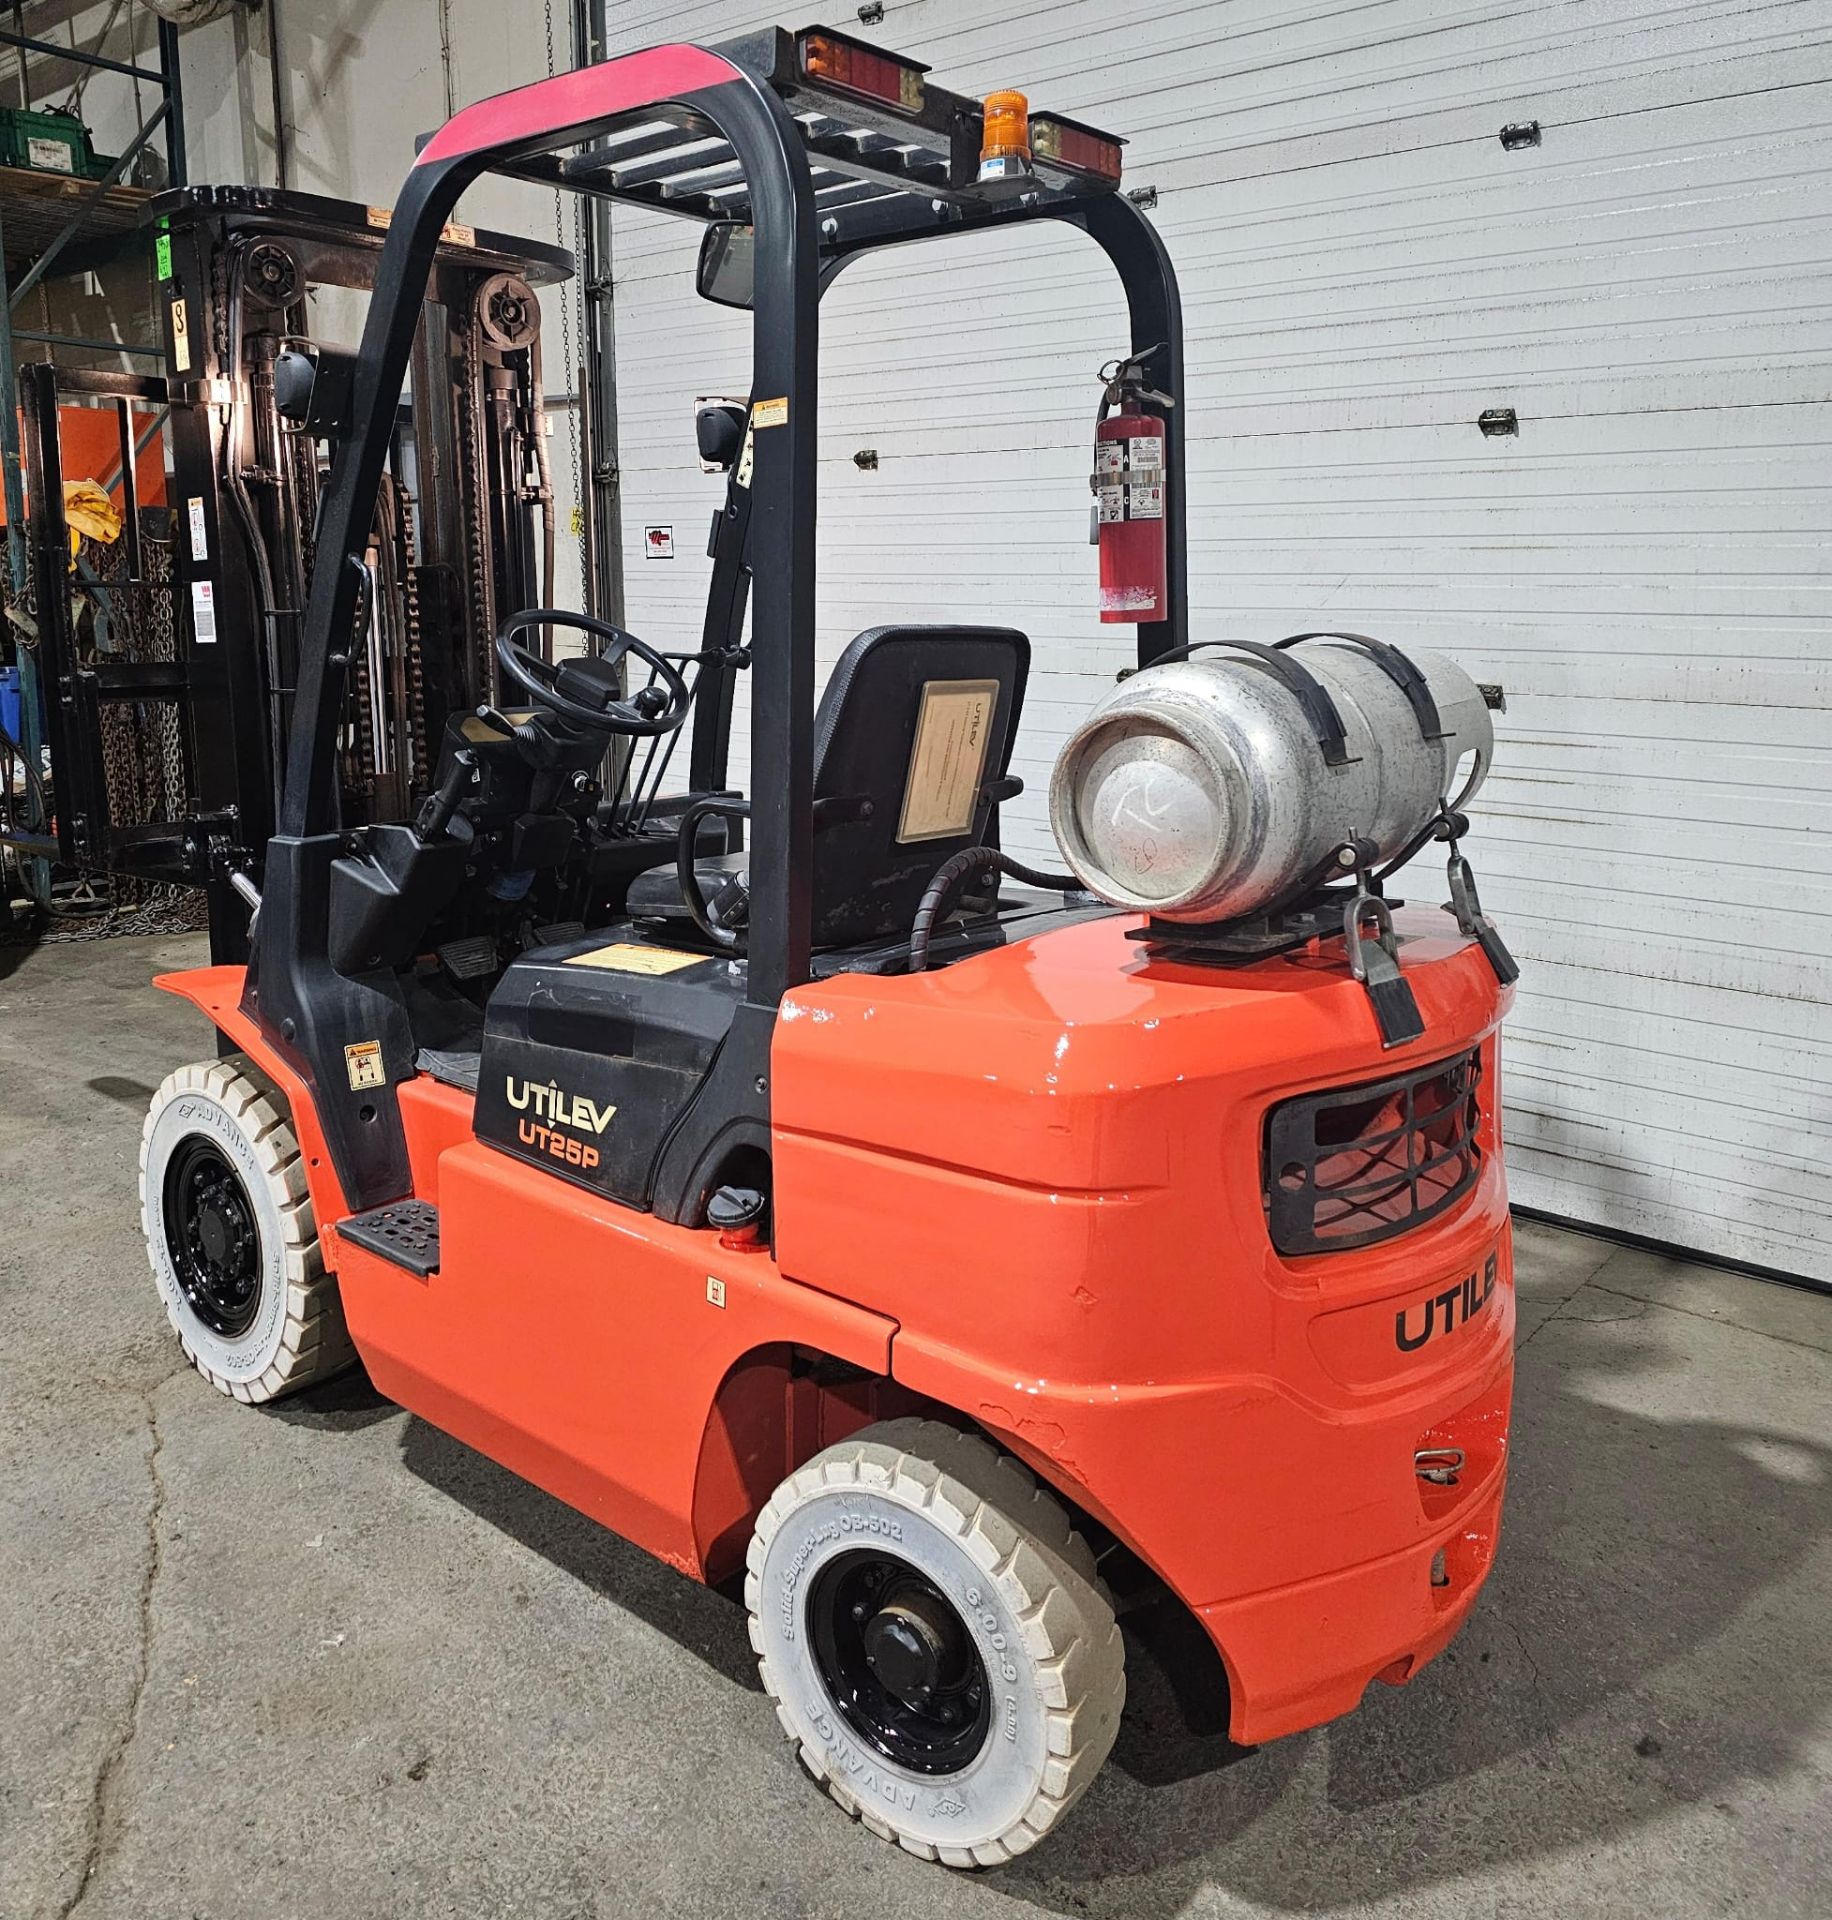 2016 Utilev 5,000lbs Capacity LPG (Propane) OUTDOOR Forklift with sideshift & 3-STAGE MAST & tires - Image 3 of 7